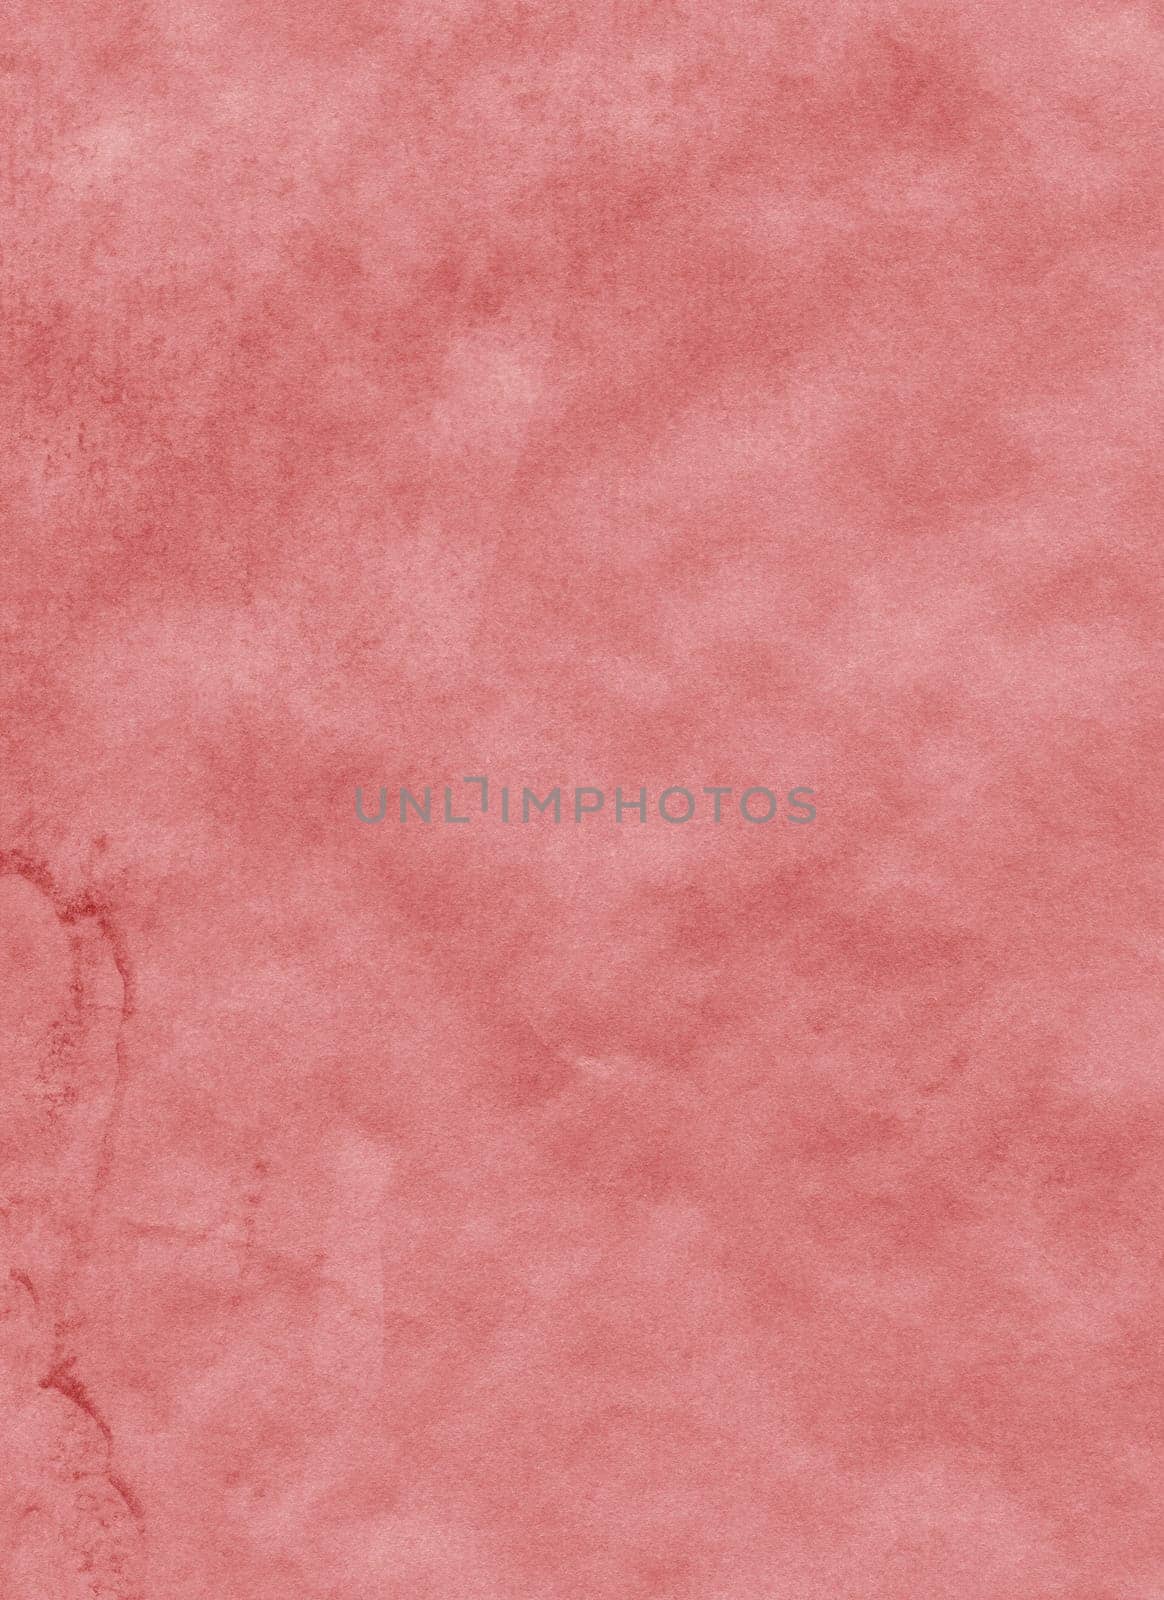 Abstract Red Watercolor Background. Red Watercolor Texture. Abstract Watercolor Hand Painted Background. Old Red Digital Paper. Watercolor texture background. Vintage textured grunge background.